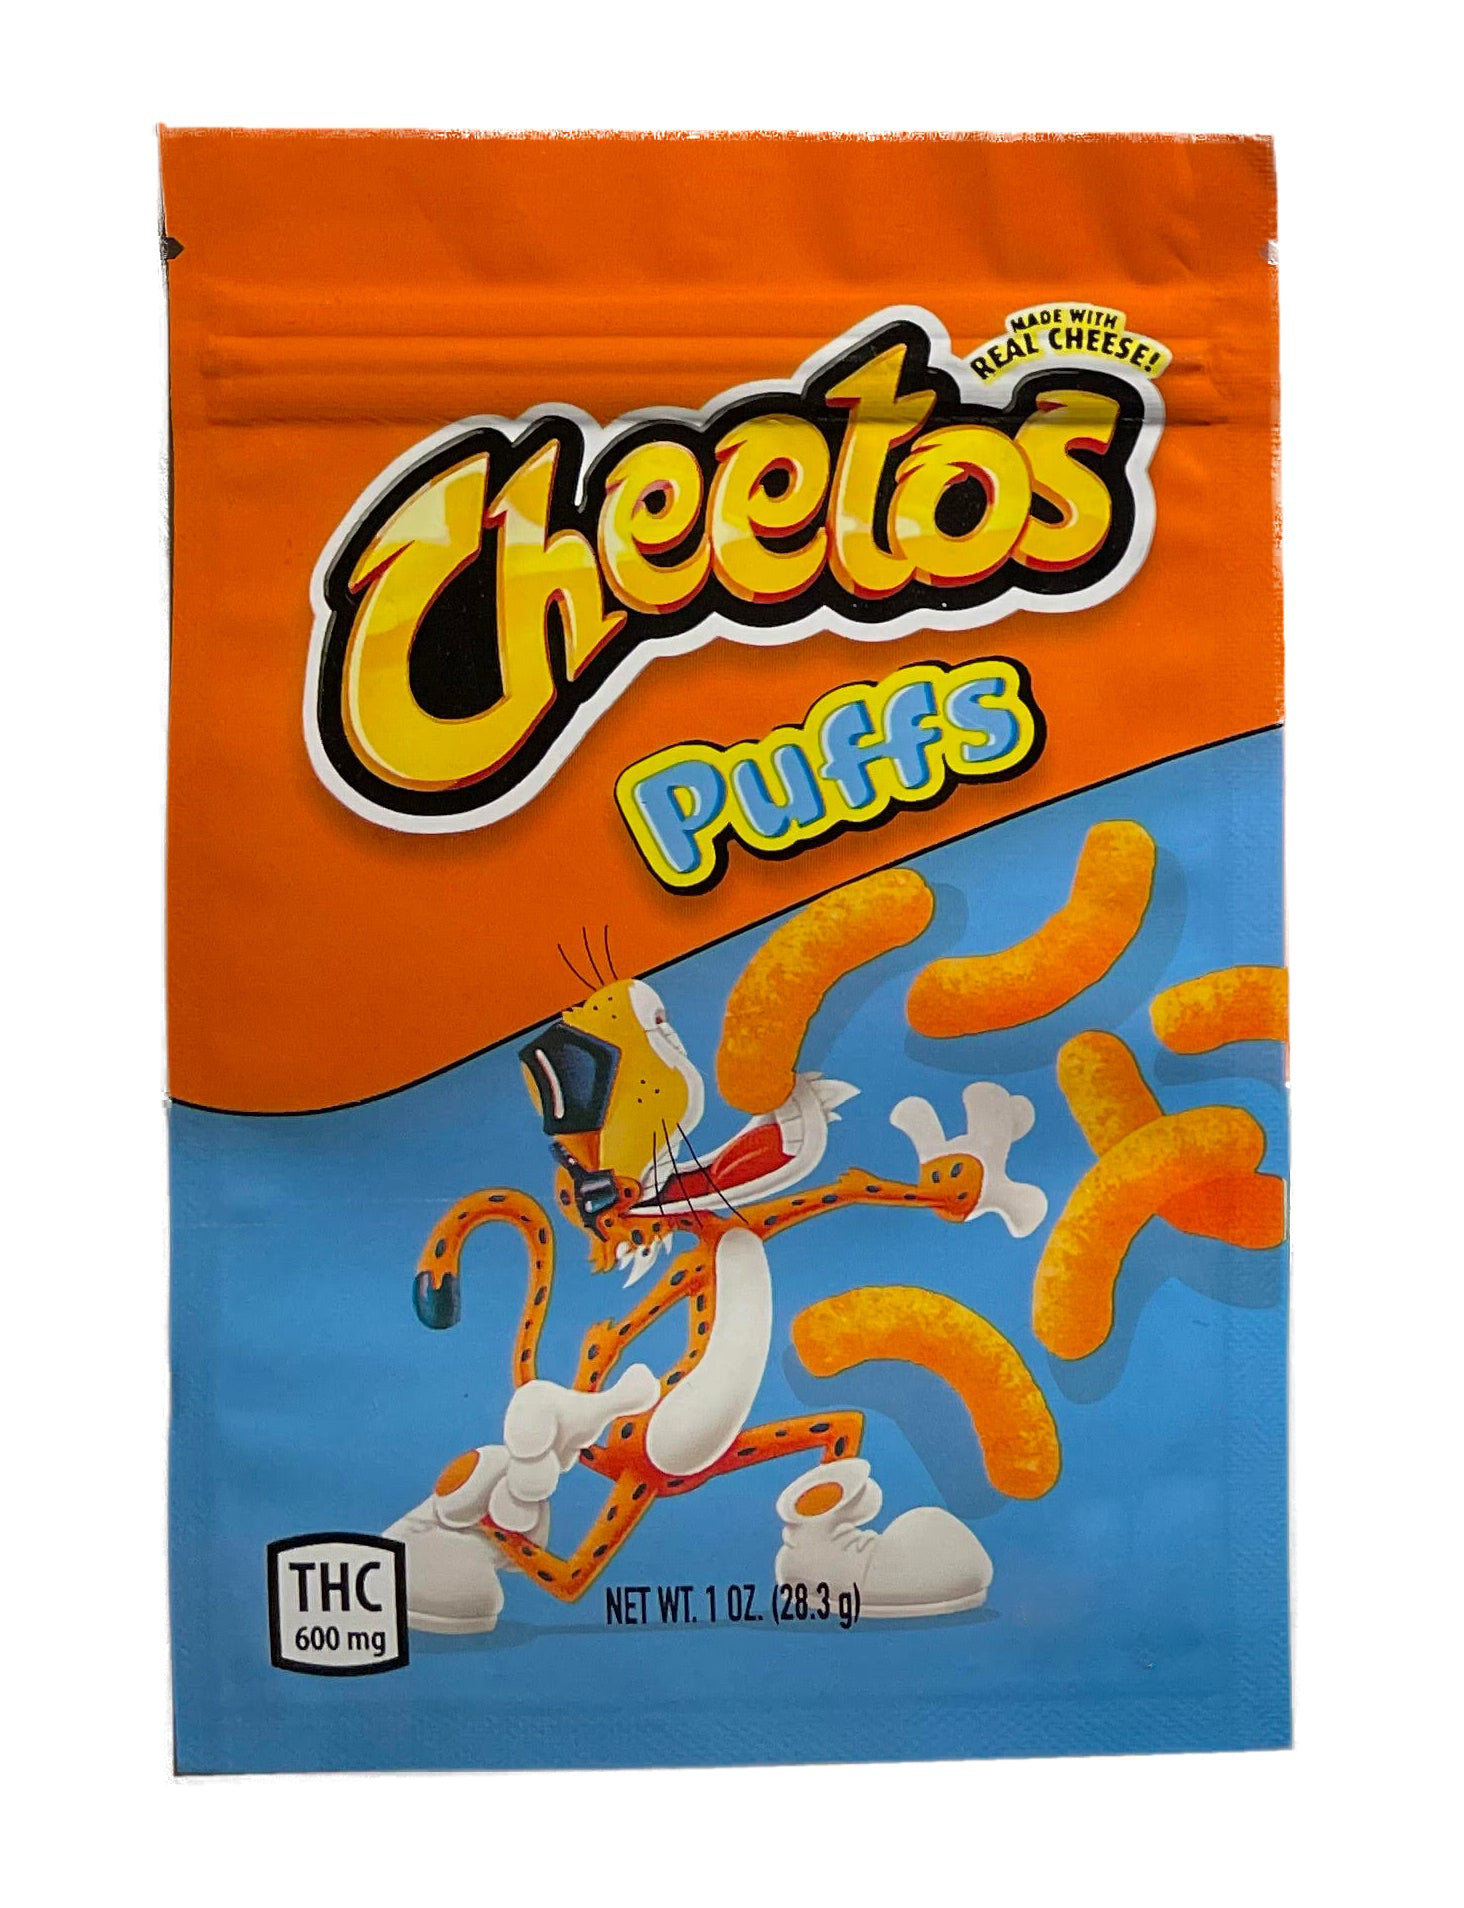 Cheetos Puff 600mg Mylar Chips bags (Bags Only)